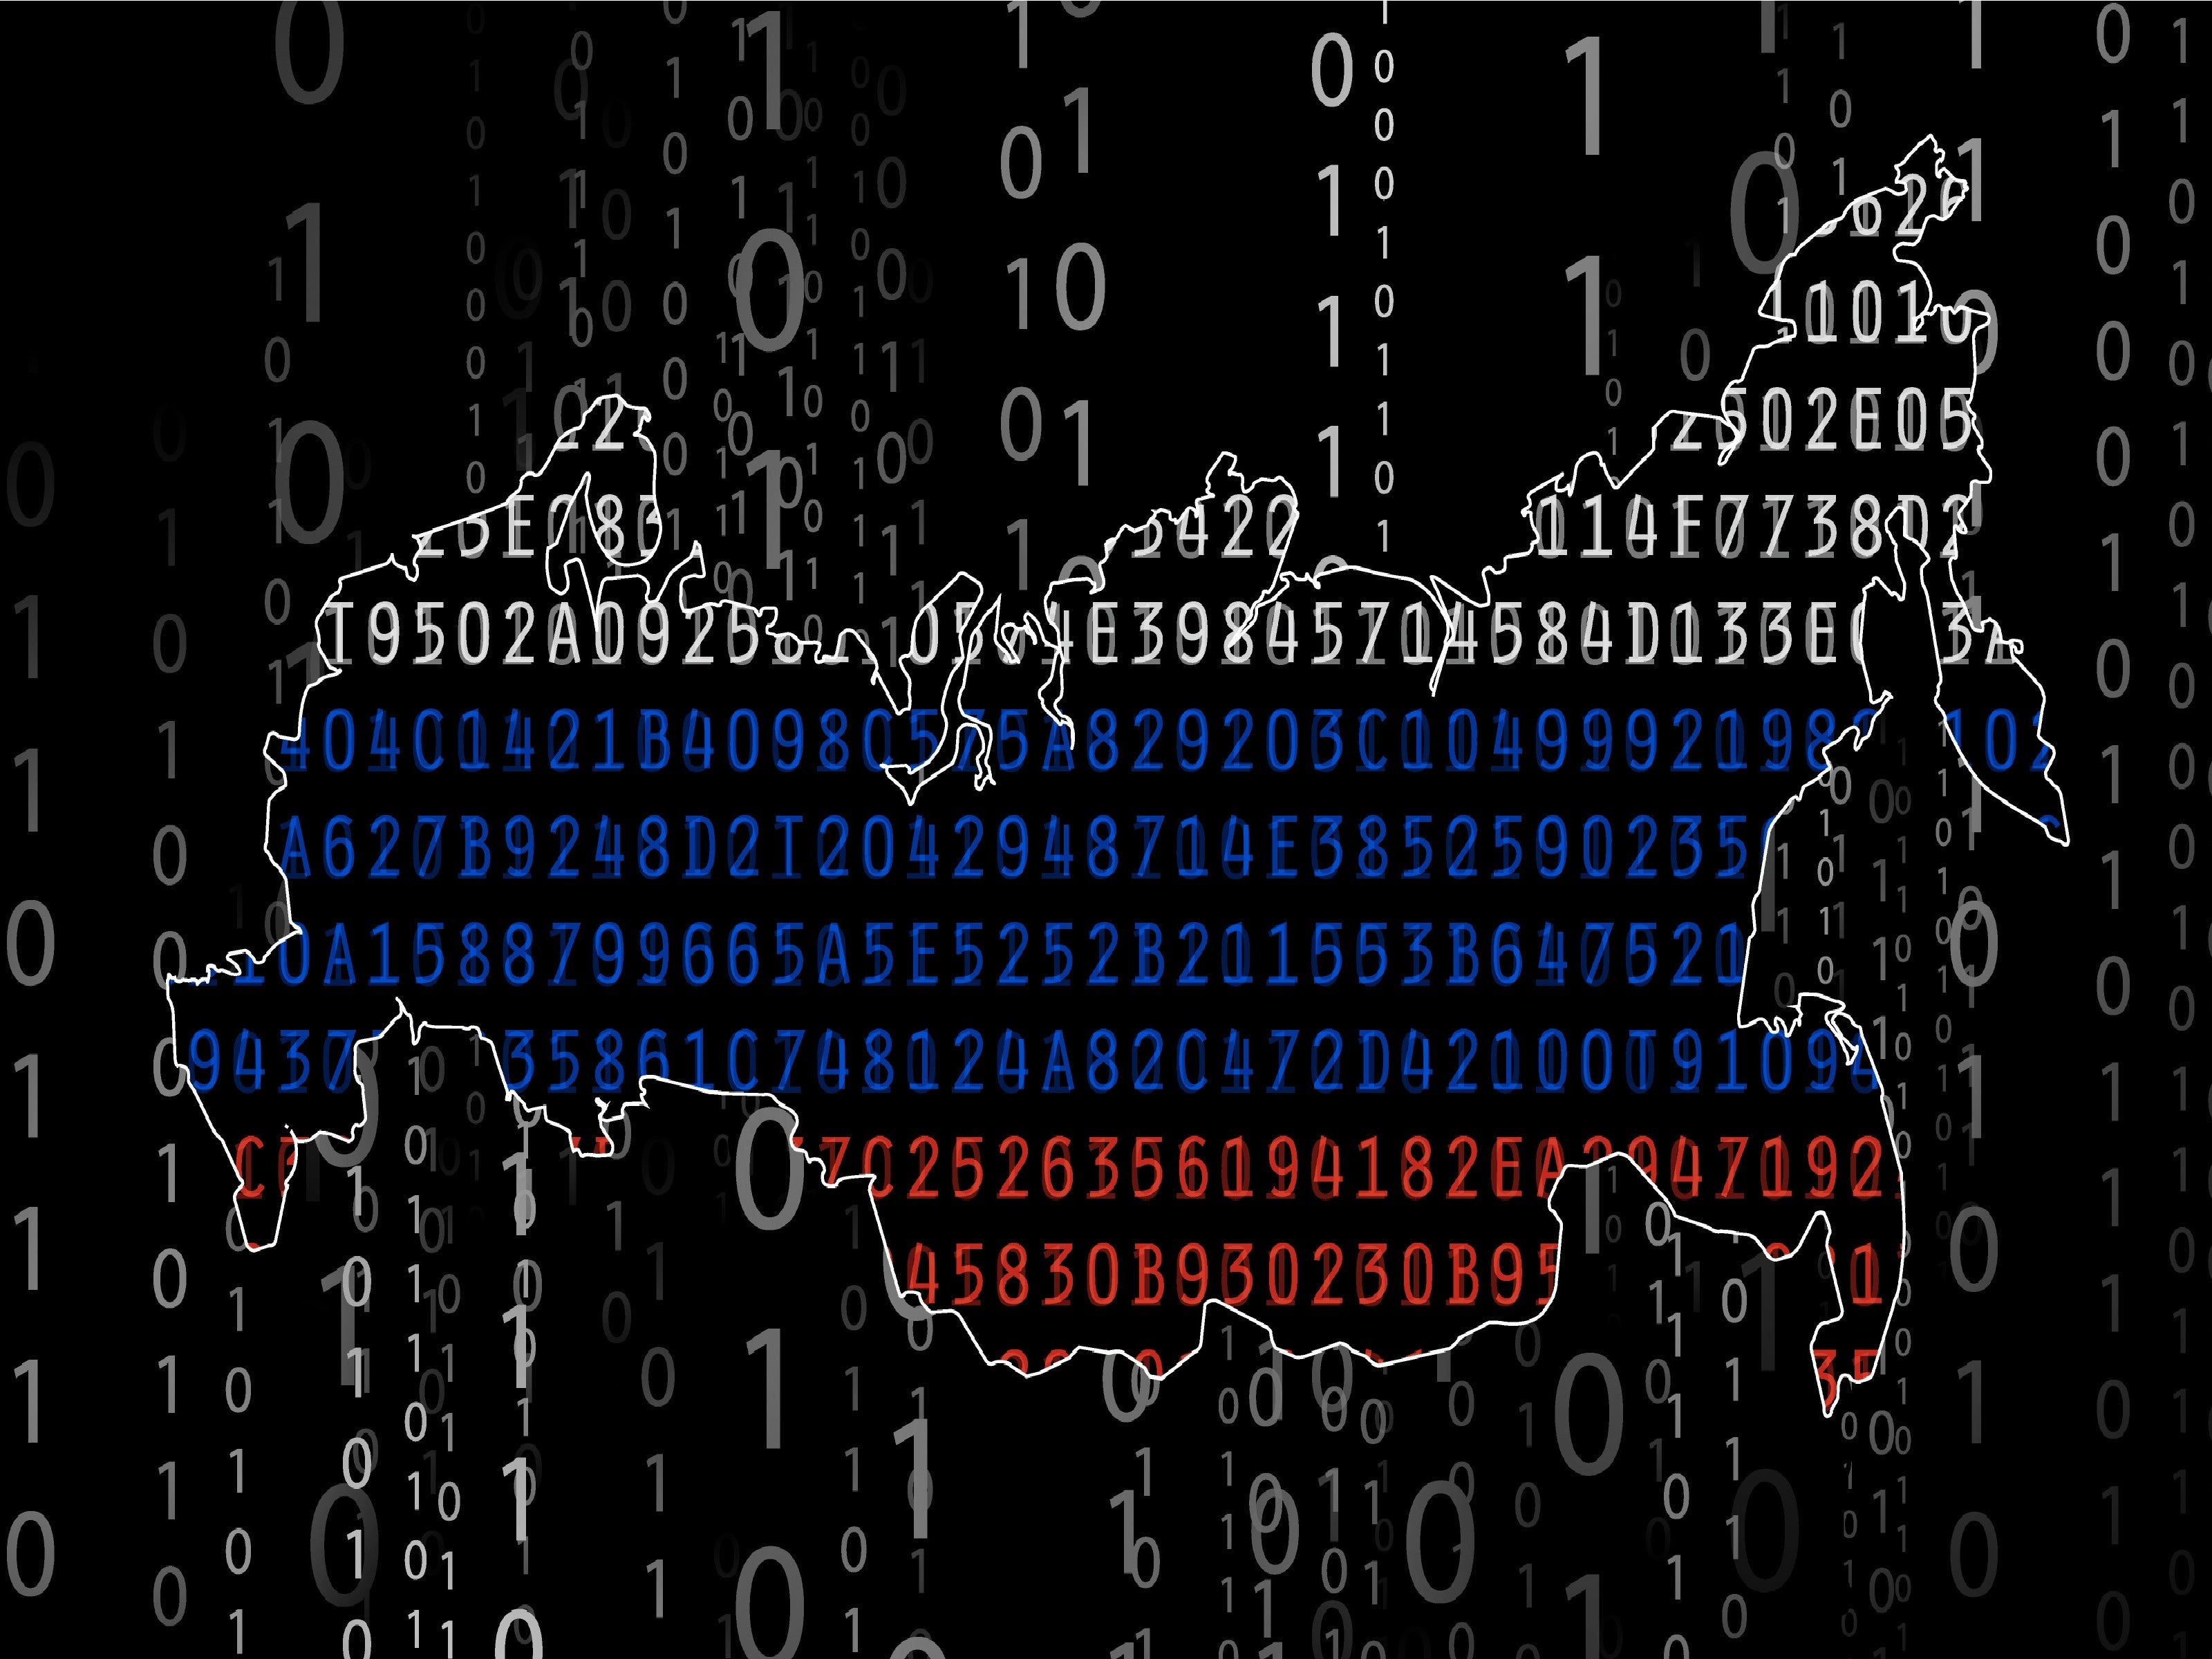 Research from Microsoft in October 2021 revealed Russia is behind nearly two thirds of all state-backed hacks